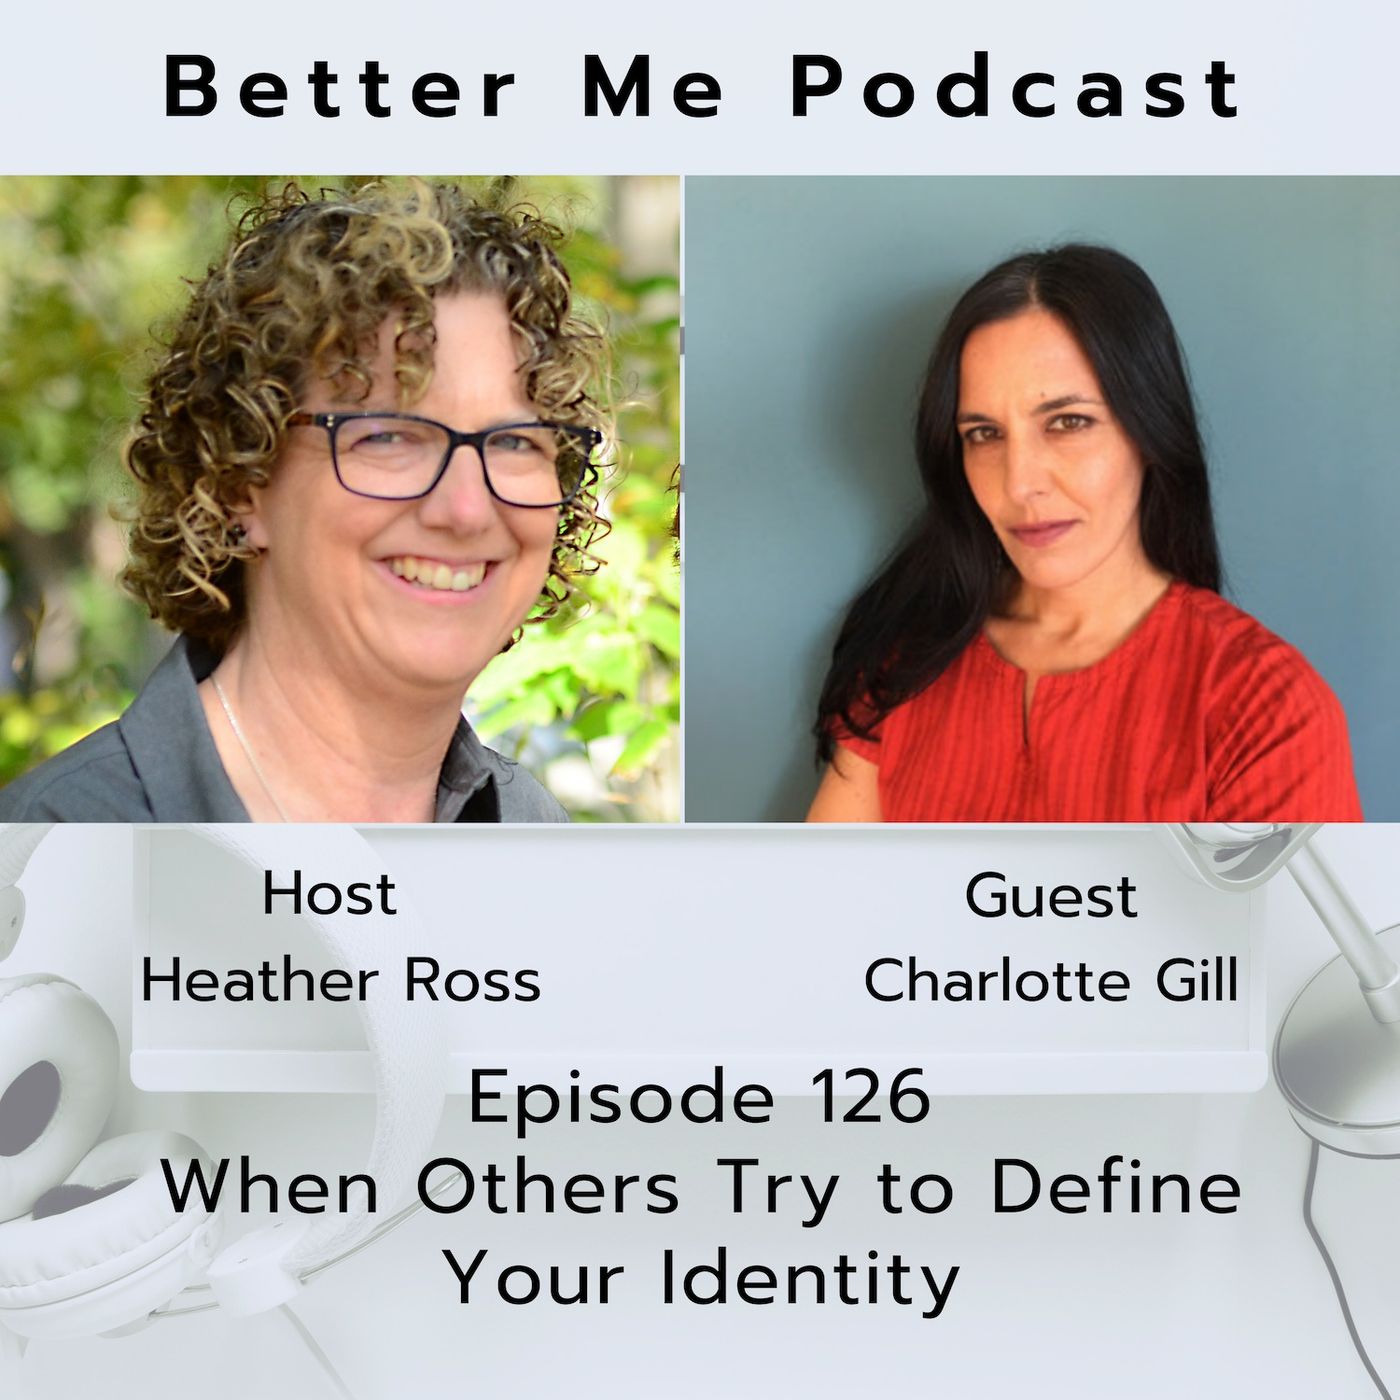 EP 126 When Others Try to Define Your Identity (with guest Charlotte Gill)